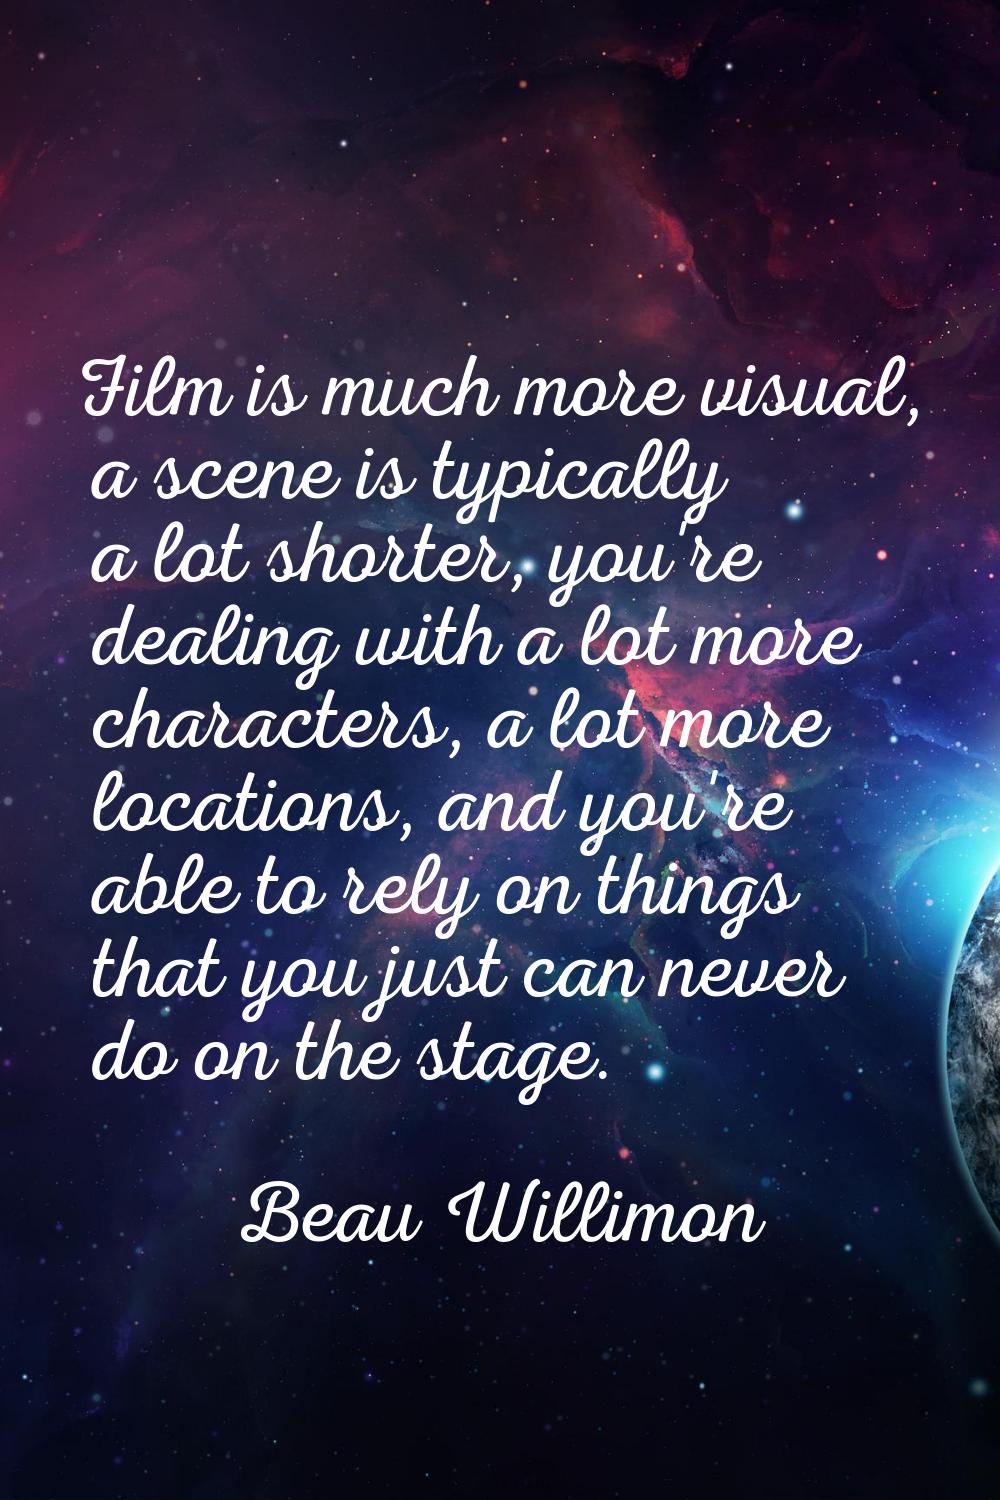 Film is much more visual, a scene is typically a lot shorter, you're dealing with a lot more charac